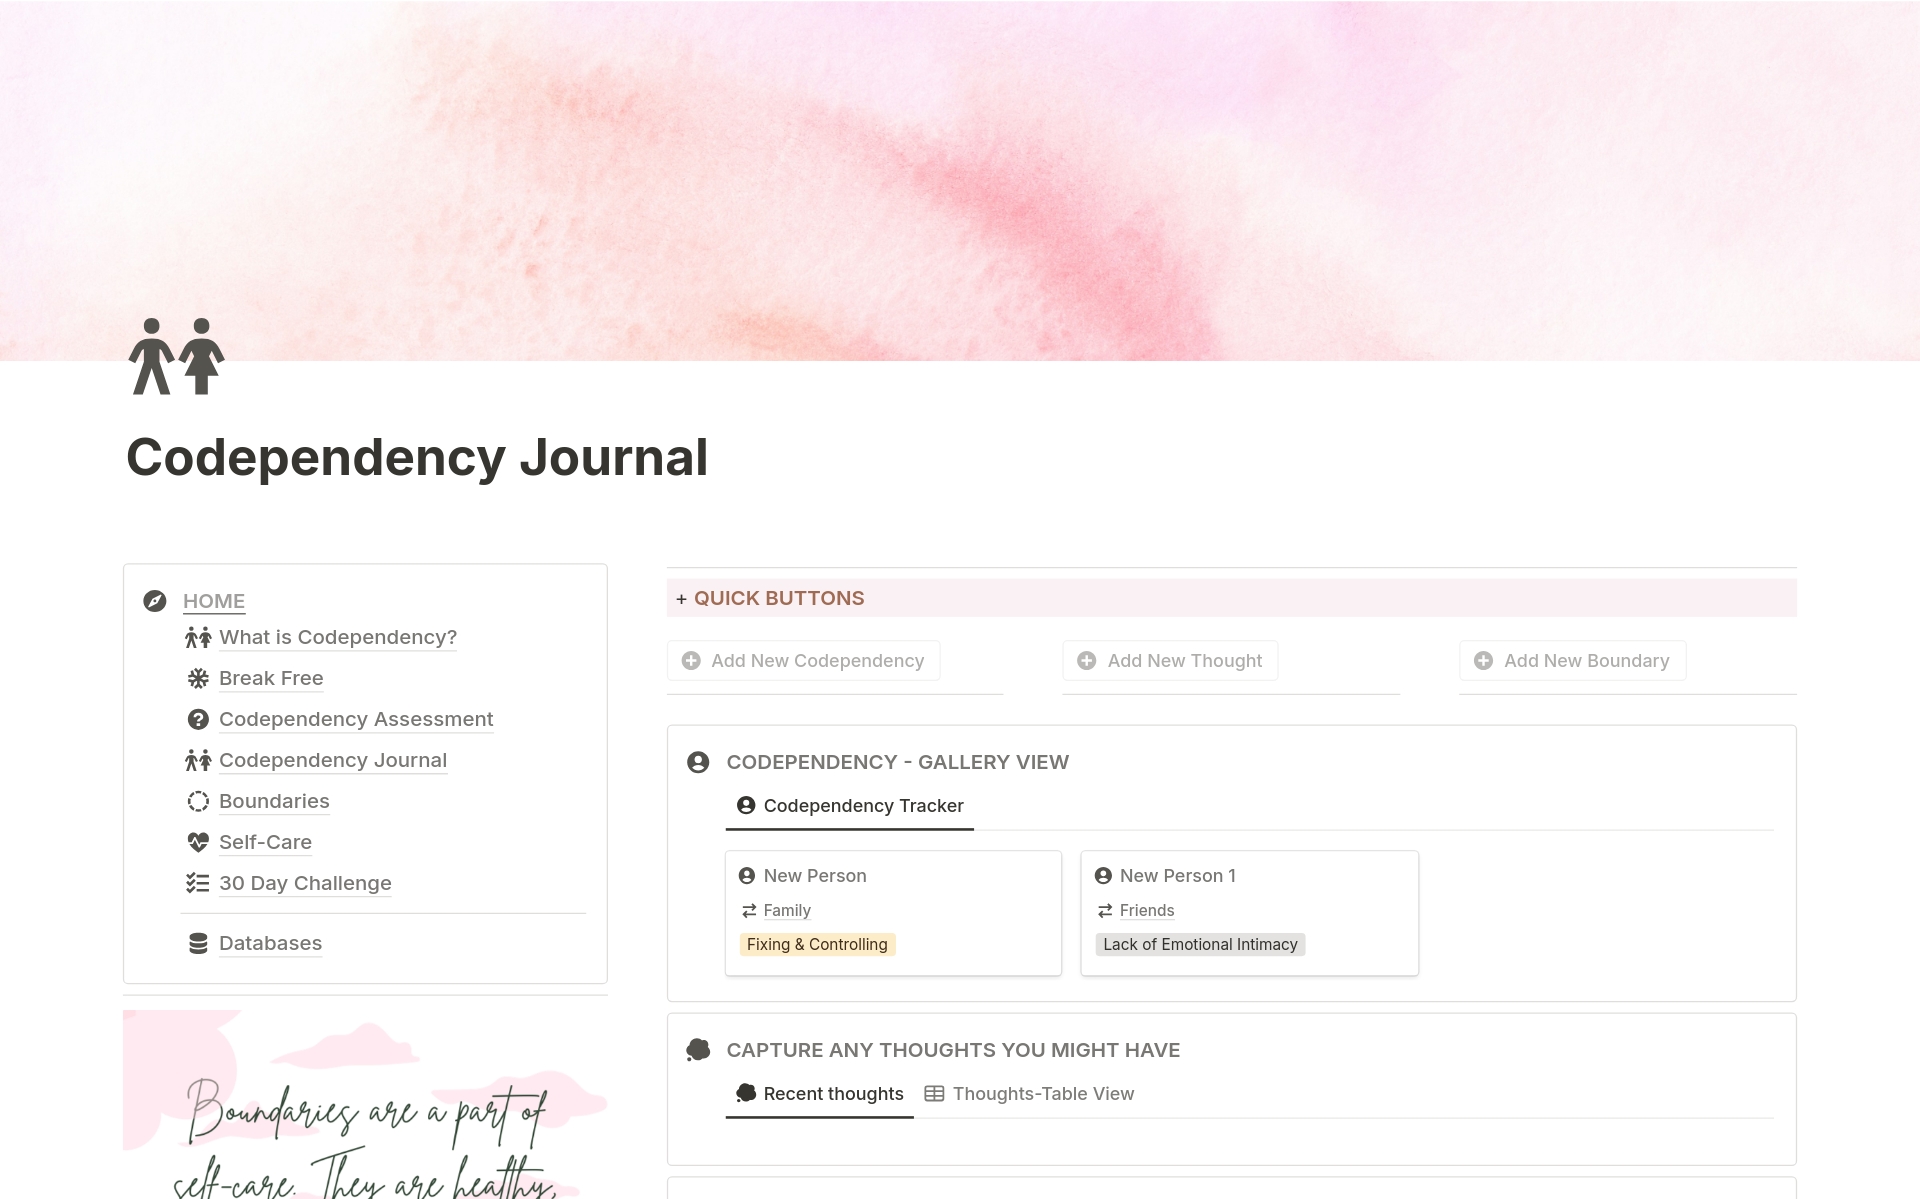 The Codependency Journal Notion template is designed to help individuals gain insight into and manage codependent behaviors in their relationships.